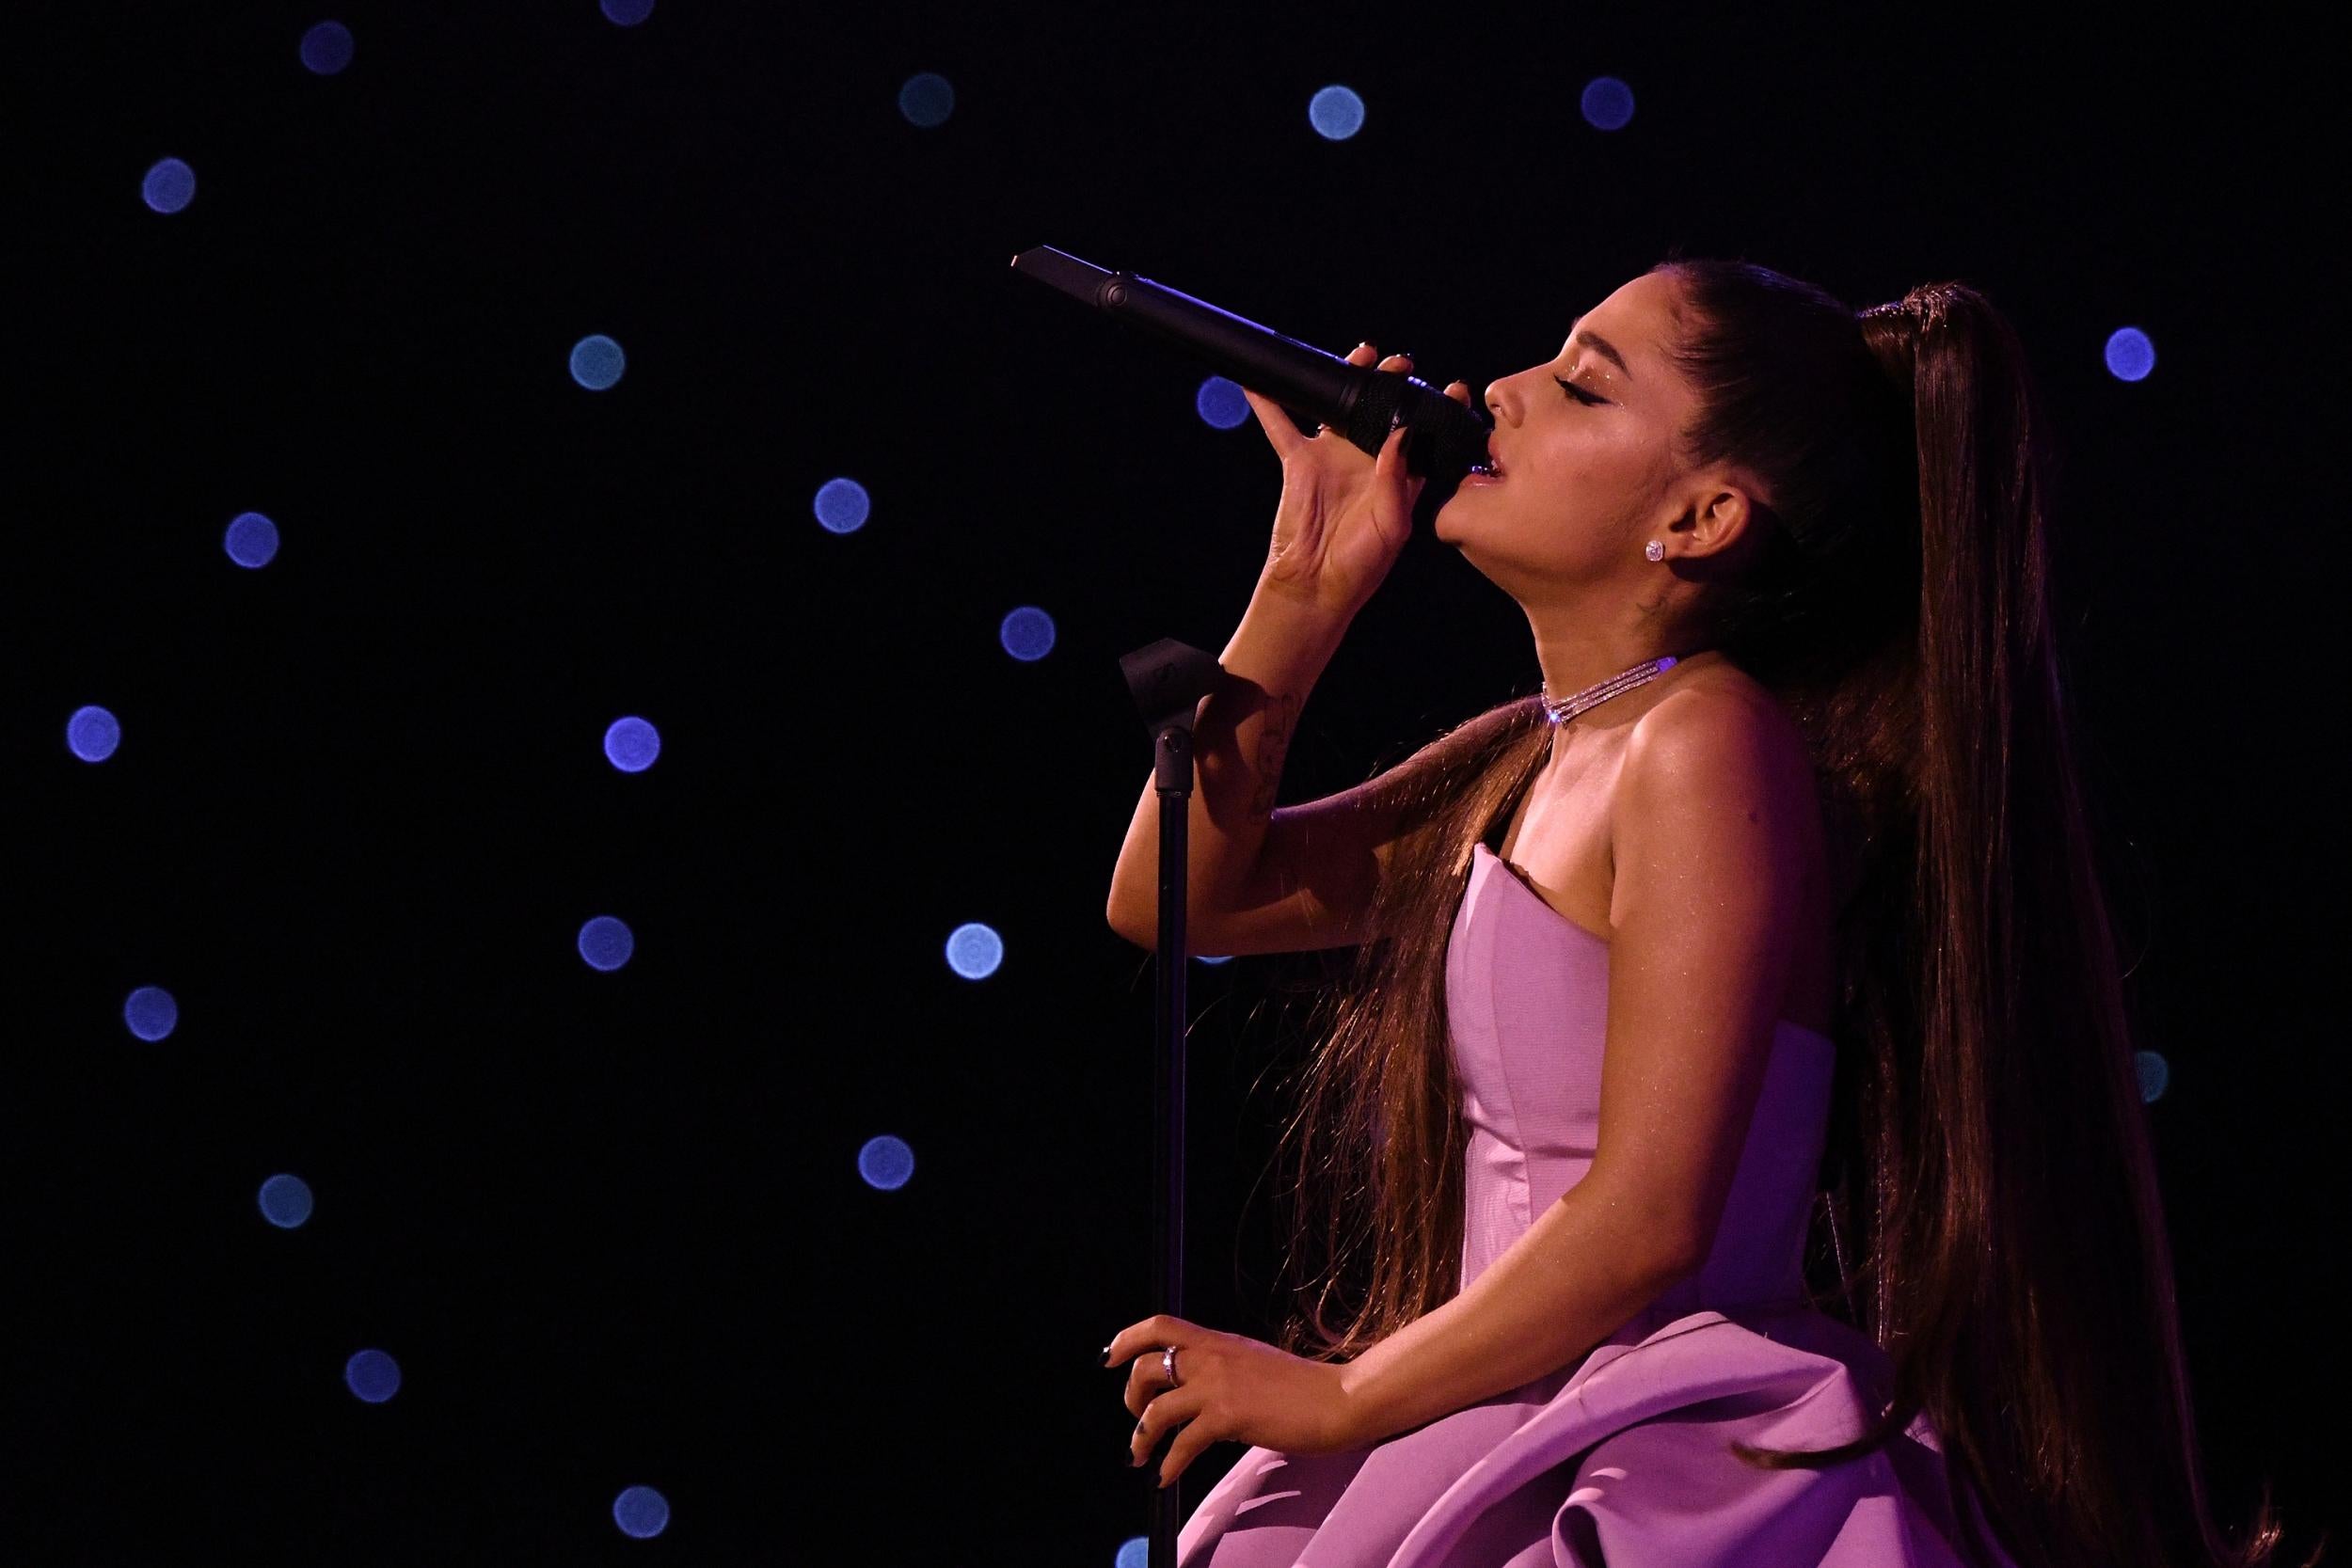 Ariana Grande Visits the 'Sweetener' Experience in New York City